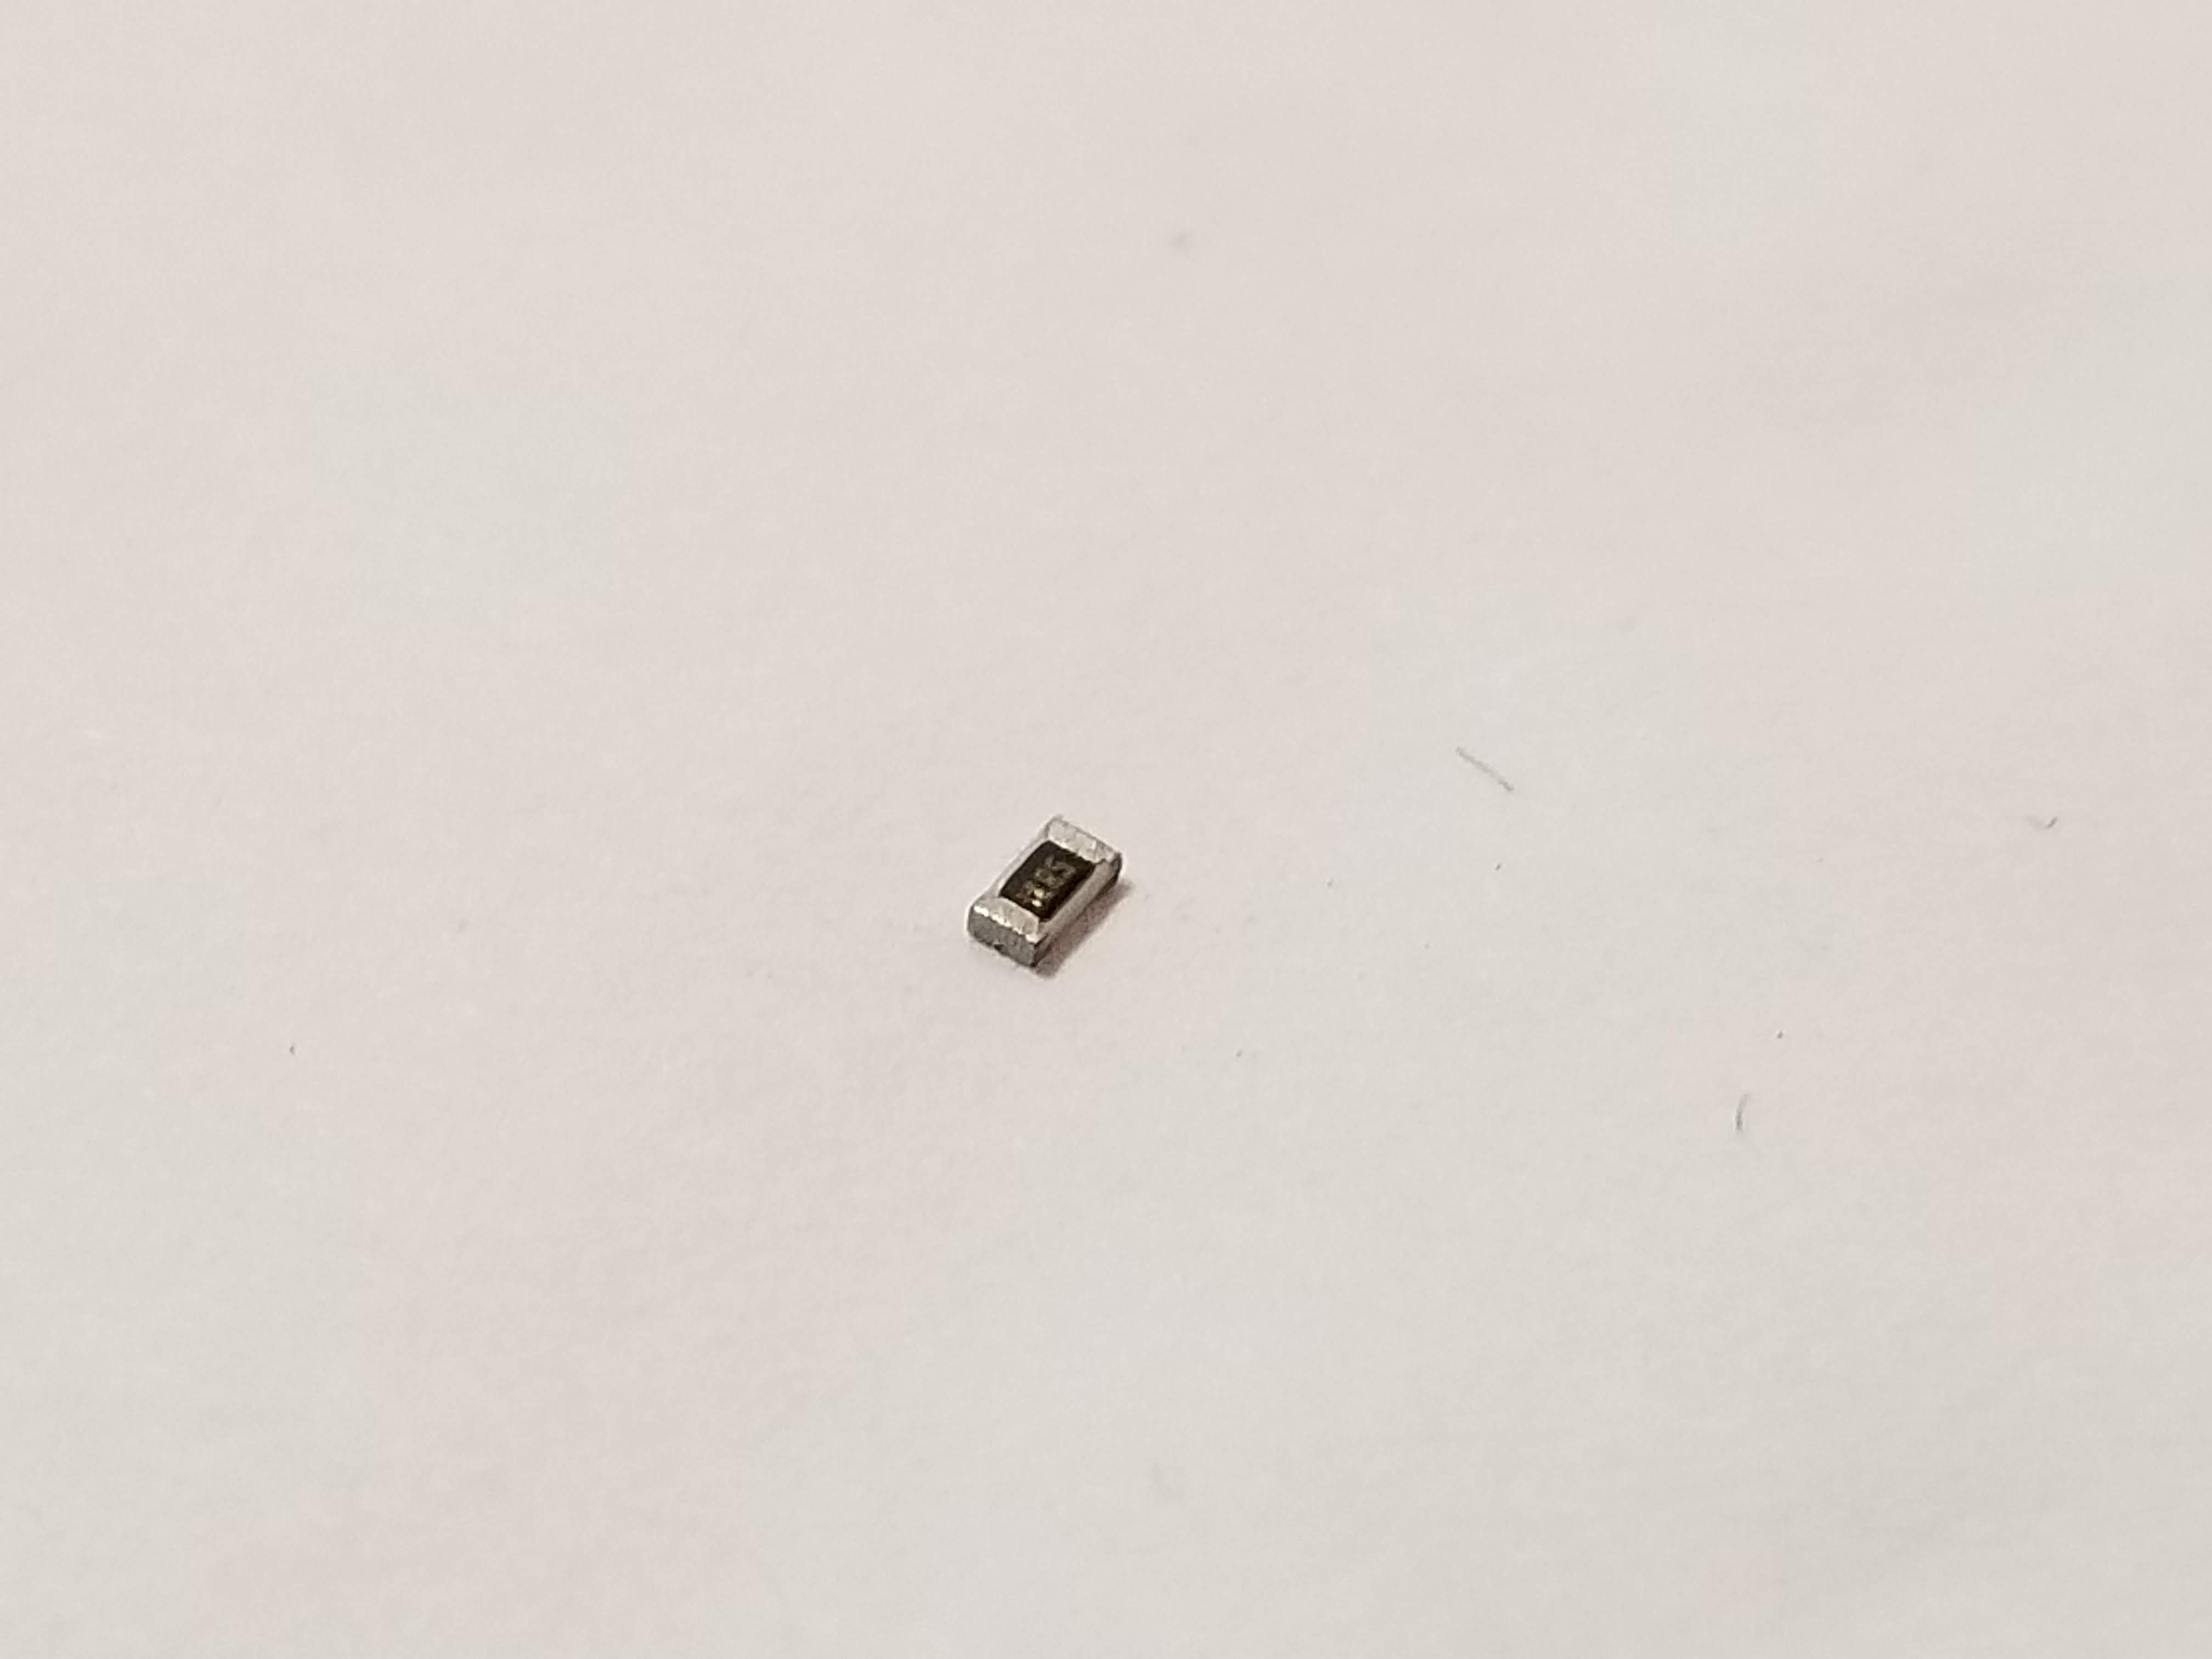 Picture of 976k Ohm Resistor 1% 0603